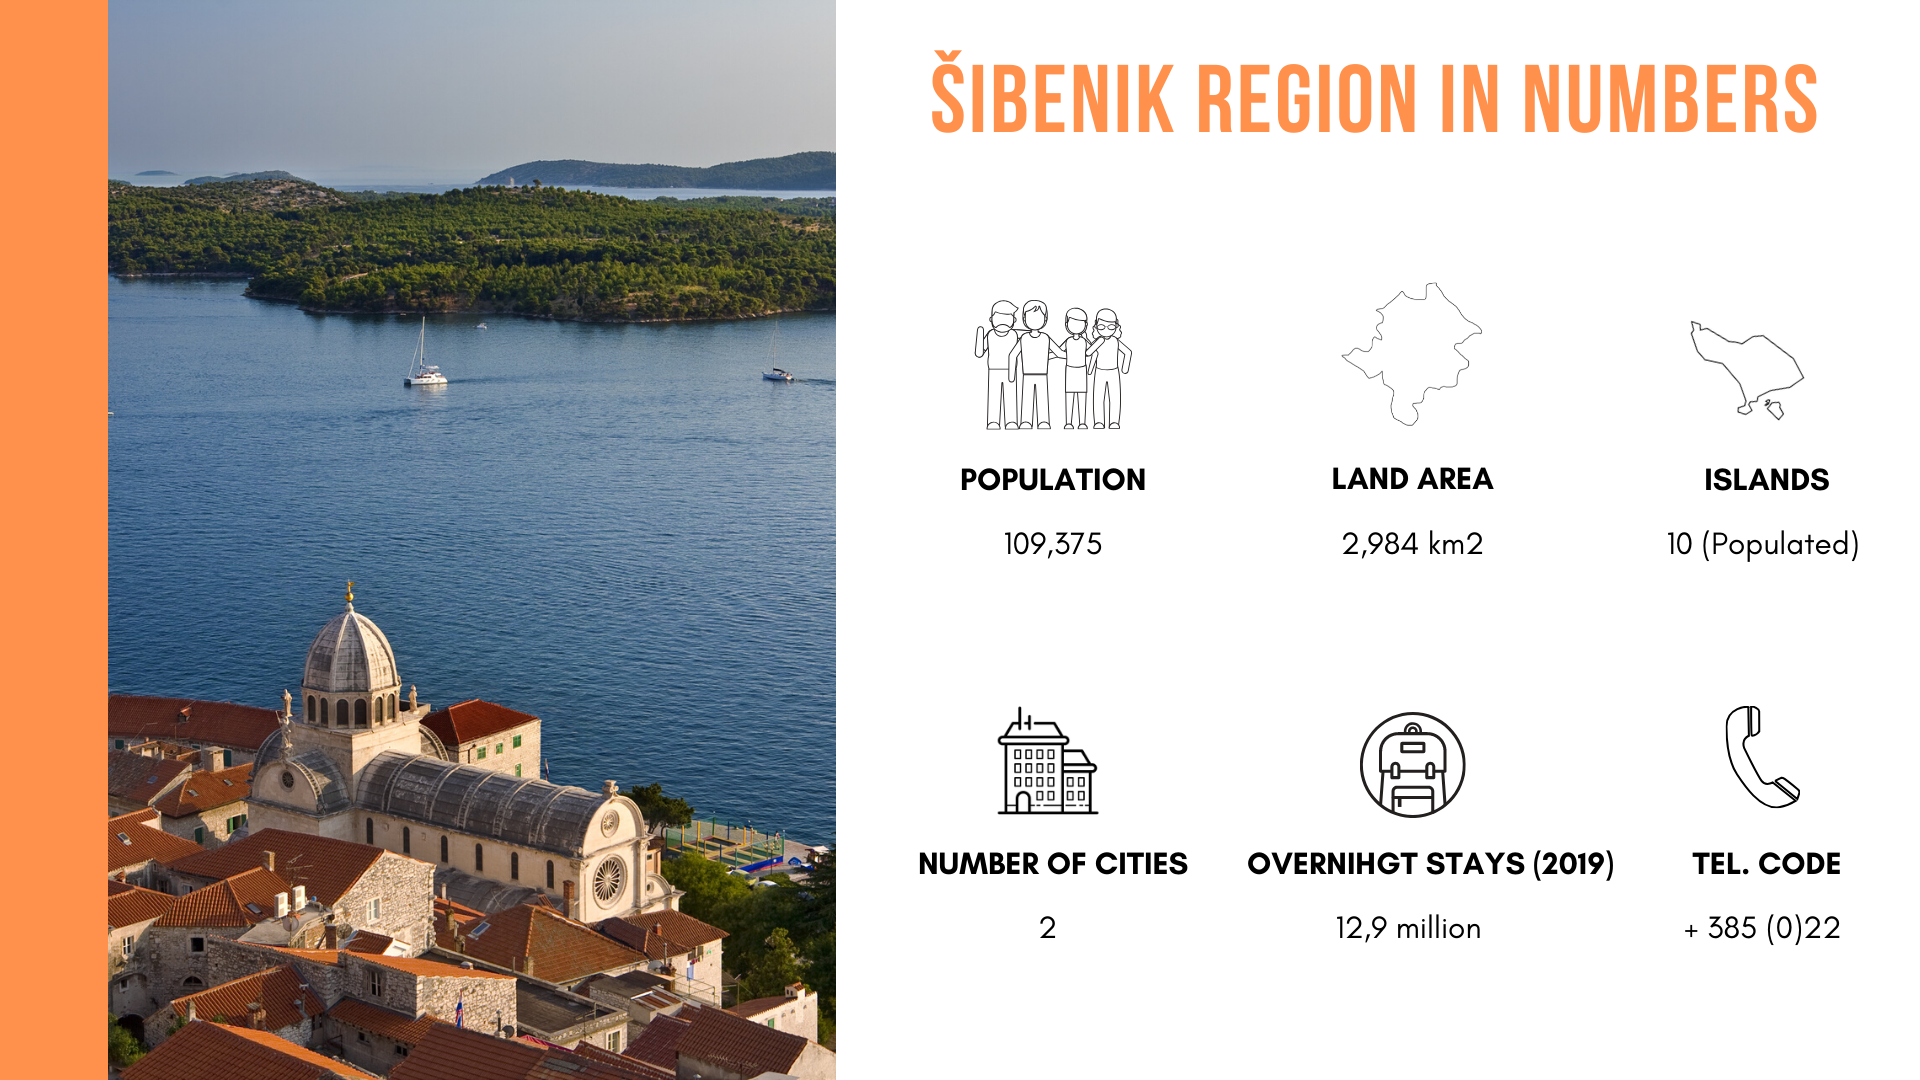 The infographic showing basic information about Šibenik-knin region in numbers.